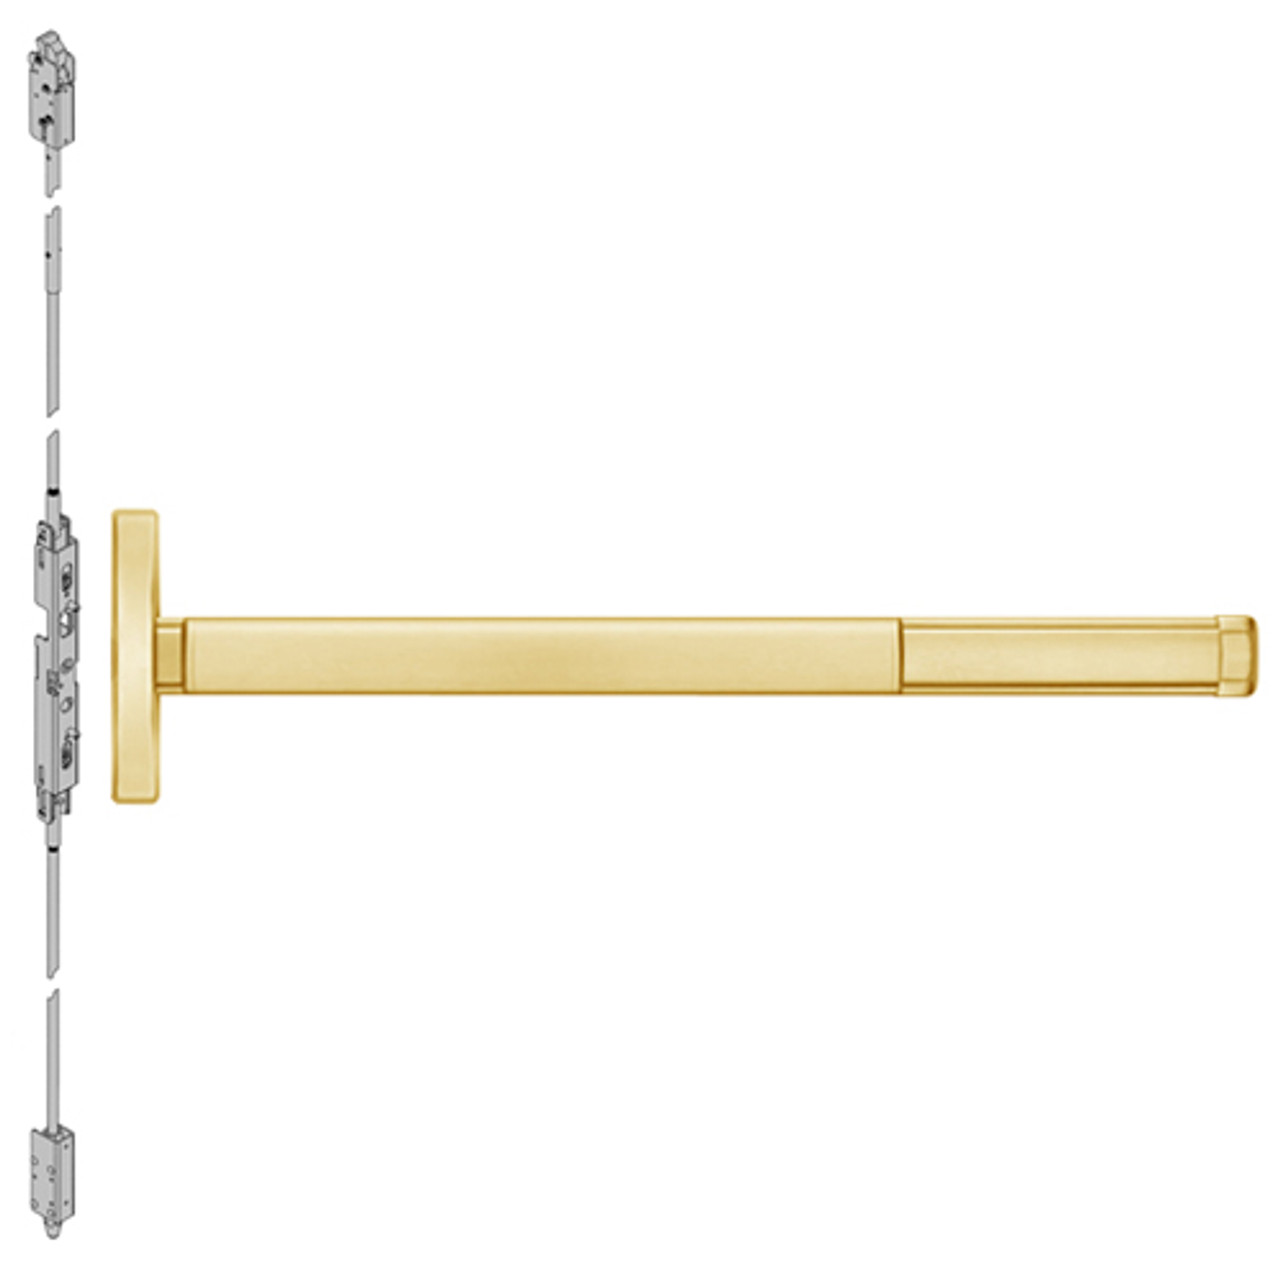 FL2603LBR-605-36 PHI 2600 Series Fire Rated Concealed Vertical Rod Exit Device Prepped for Key Retracts Latchbolt with Less Bottom Rod in Bright Brass Finish